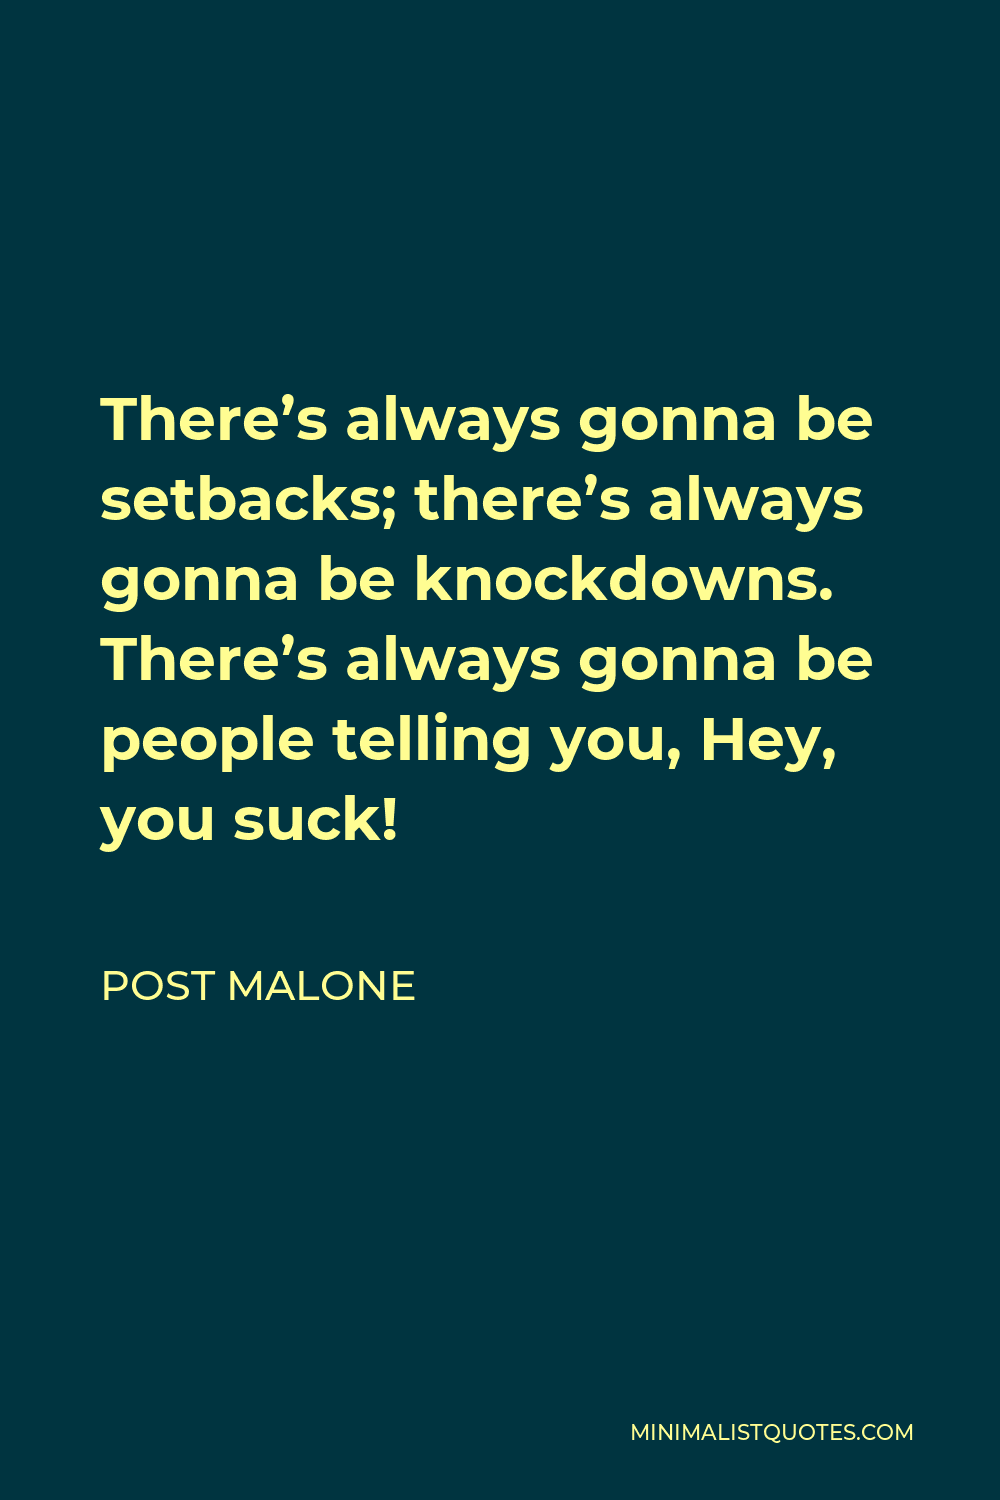 Post Malone Quote - There’s always gonna be setbacks; there’s always gonna be knockdowns. There’s always gonna be people telling you, Hey, you suck!